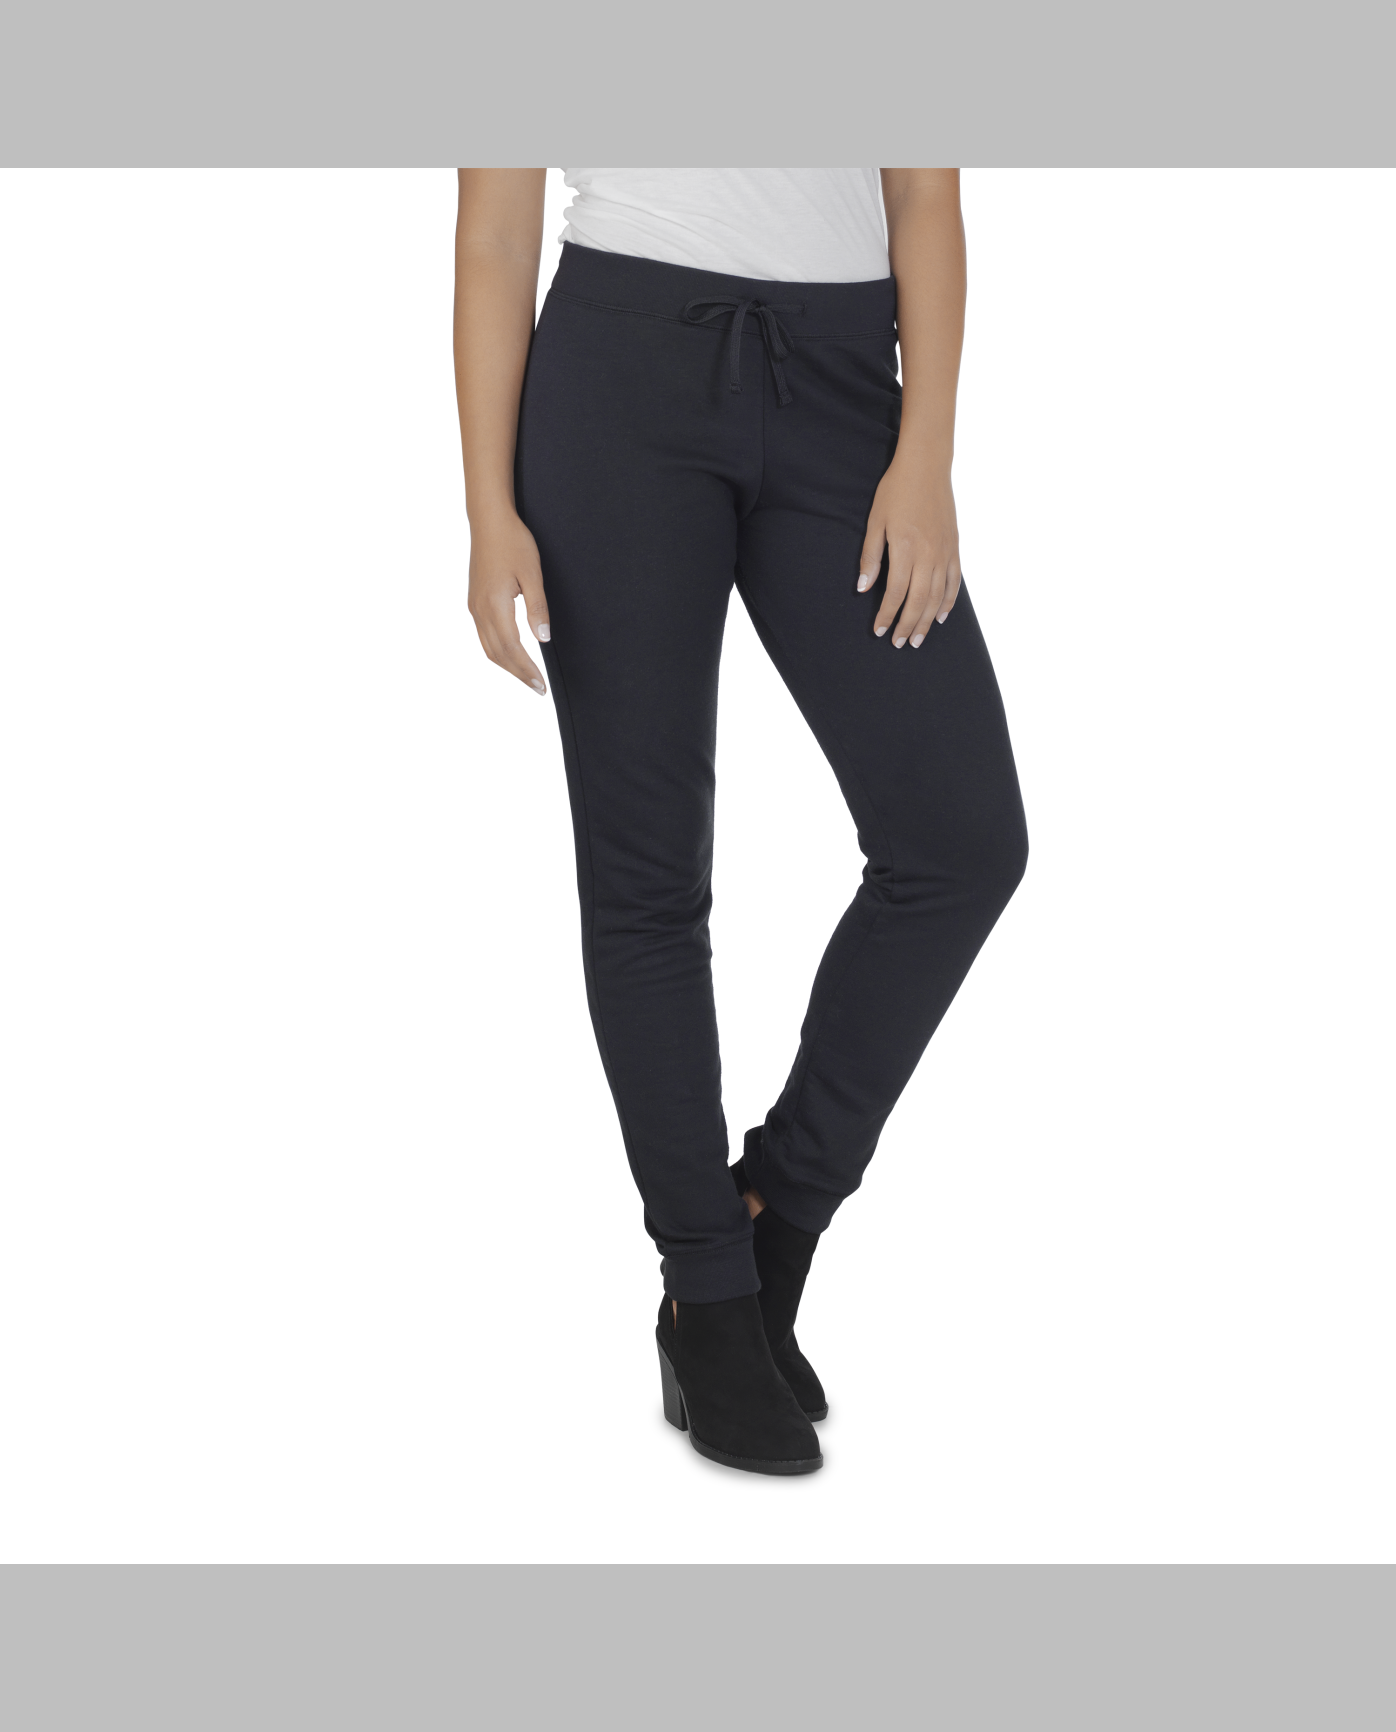 fruit of the loom joggers womens